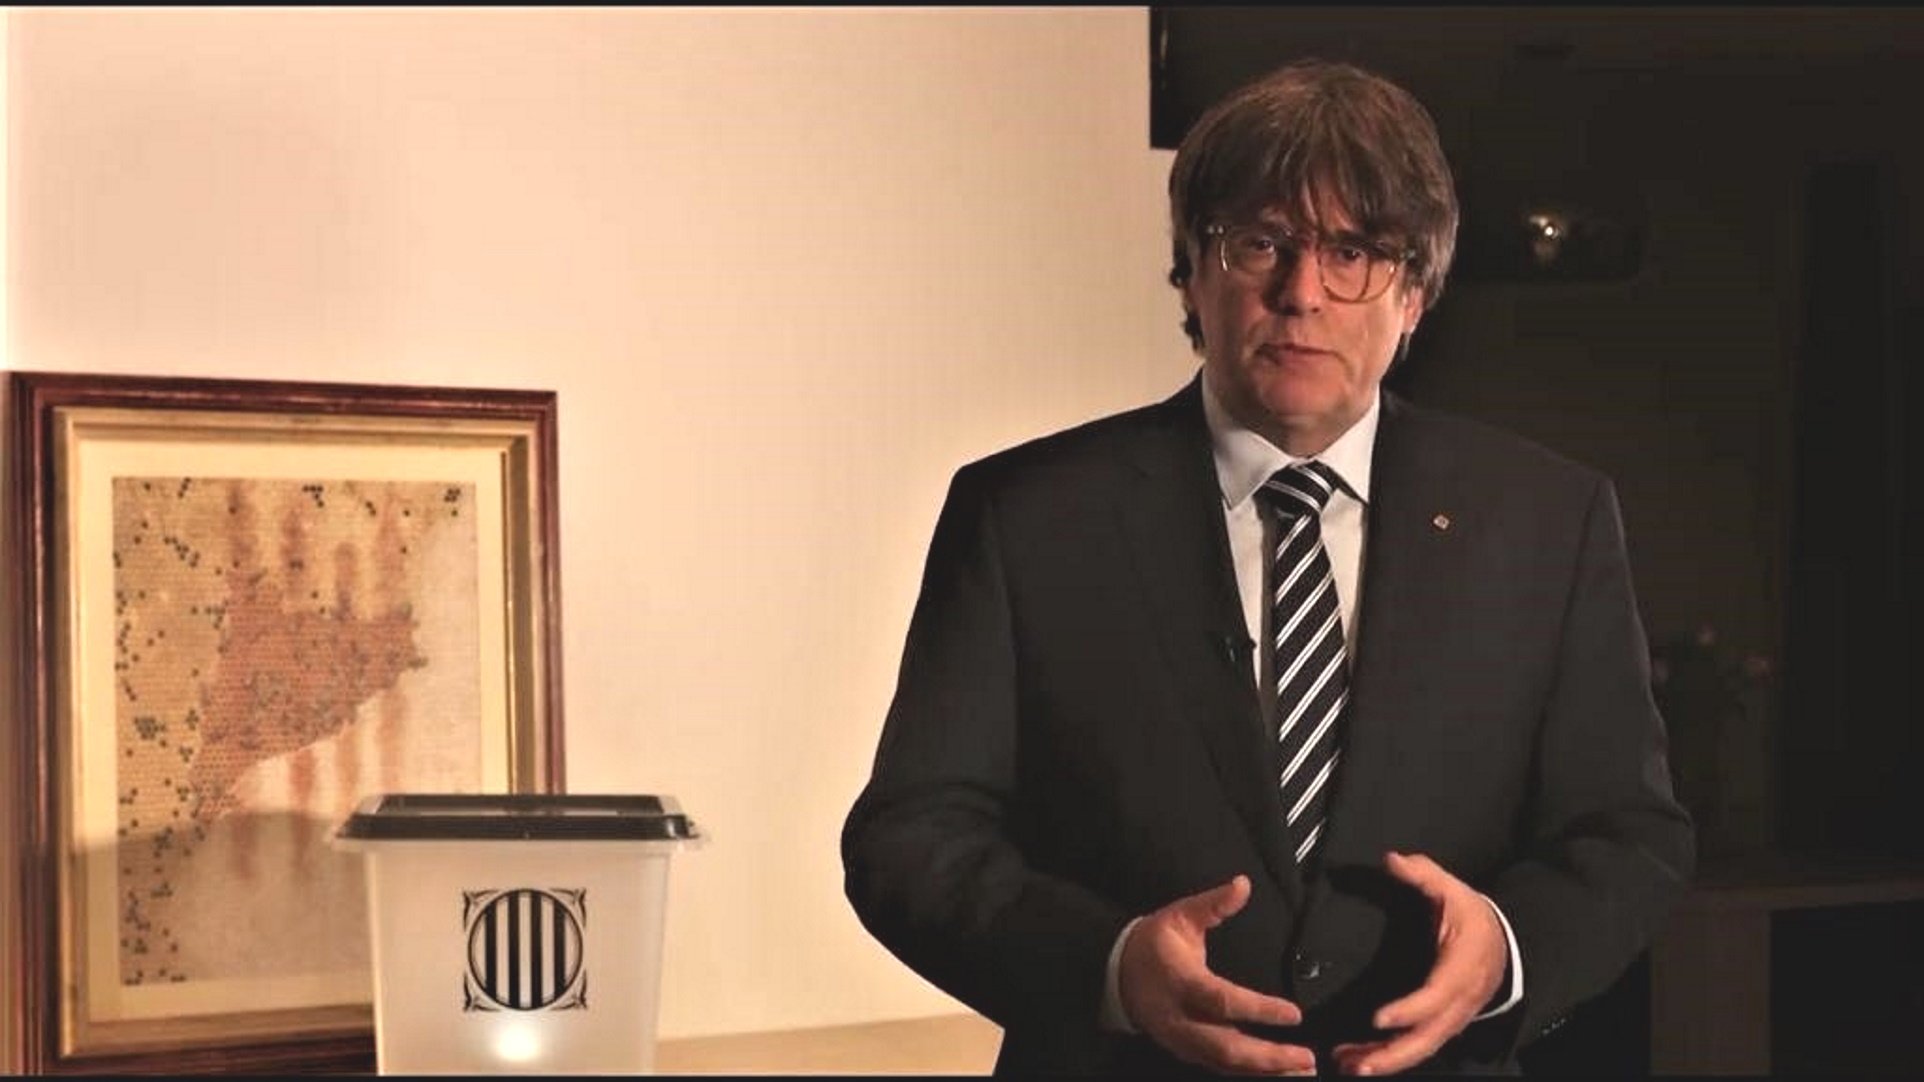 Spanish state's solicitors also want Puigdemont to face disorder and misuse of funds charges